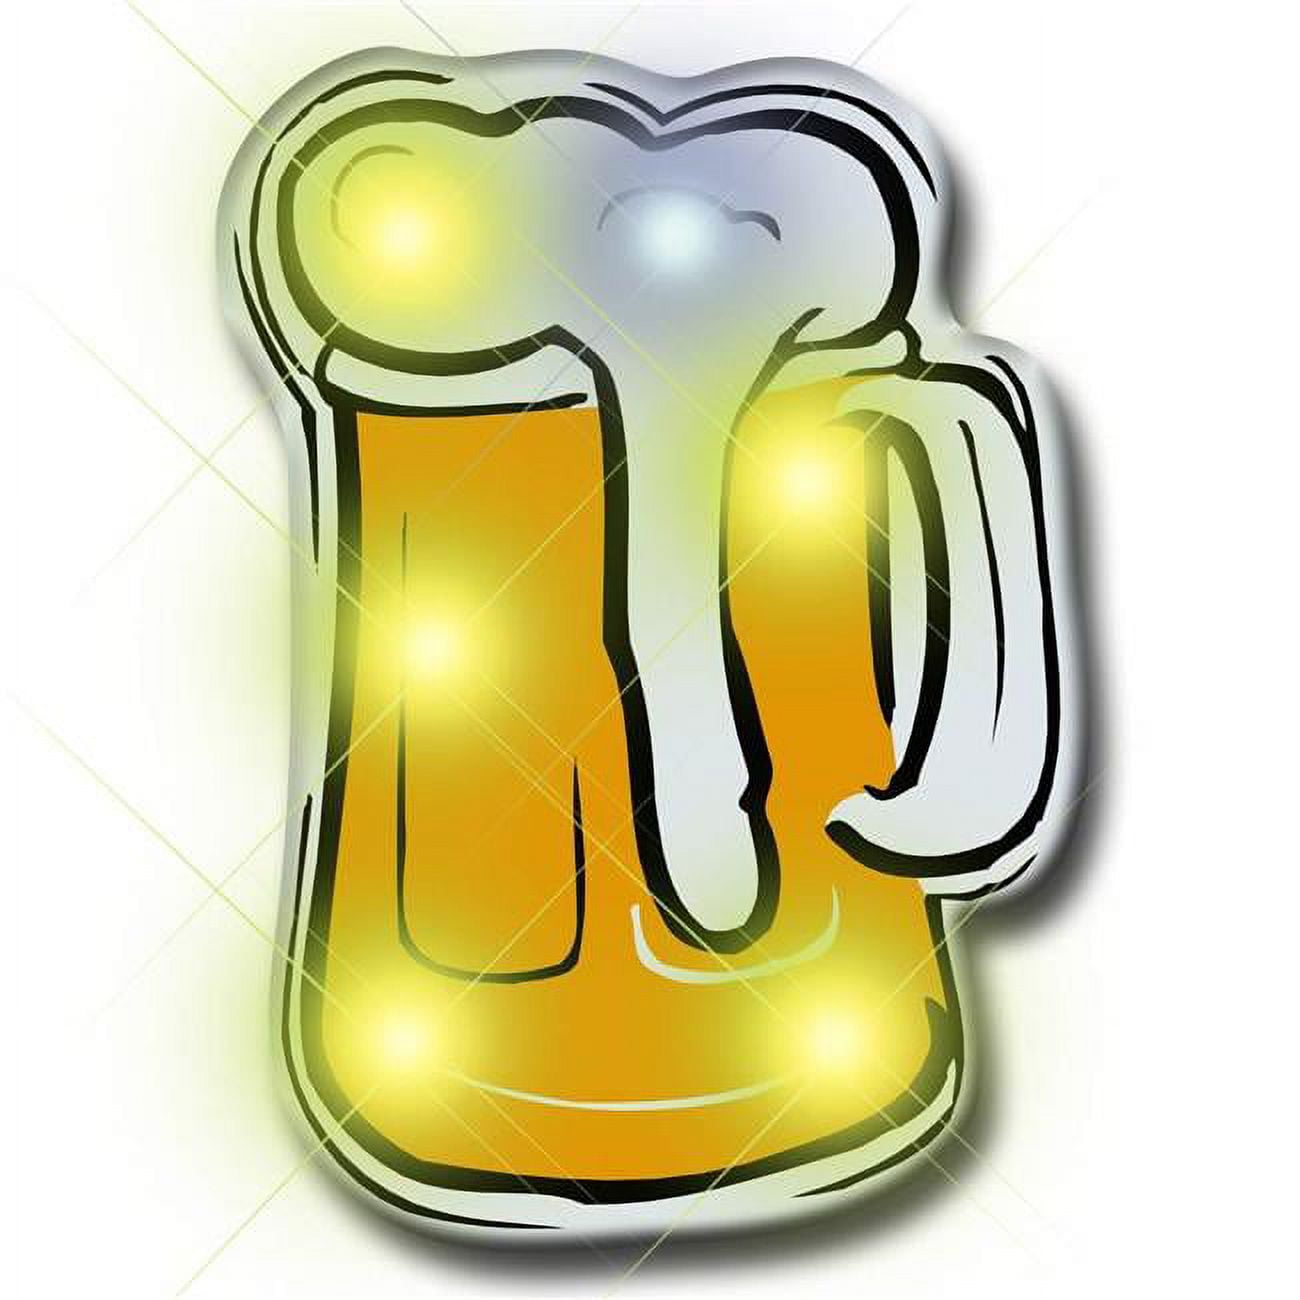 Picture of Blinkee 3255000 Beer Flashing Body Light Lapel Pins